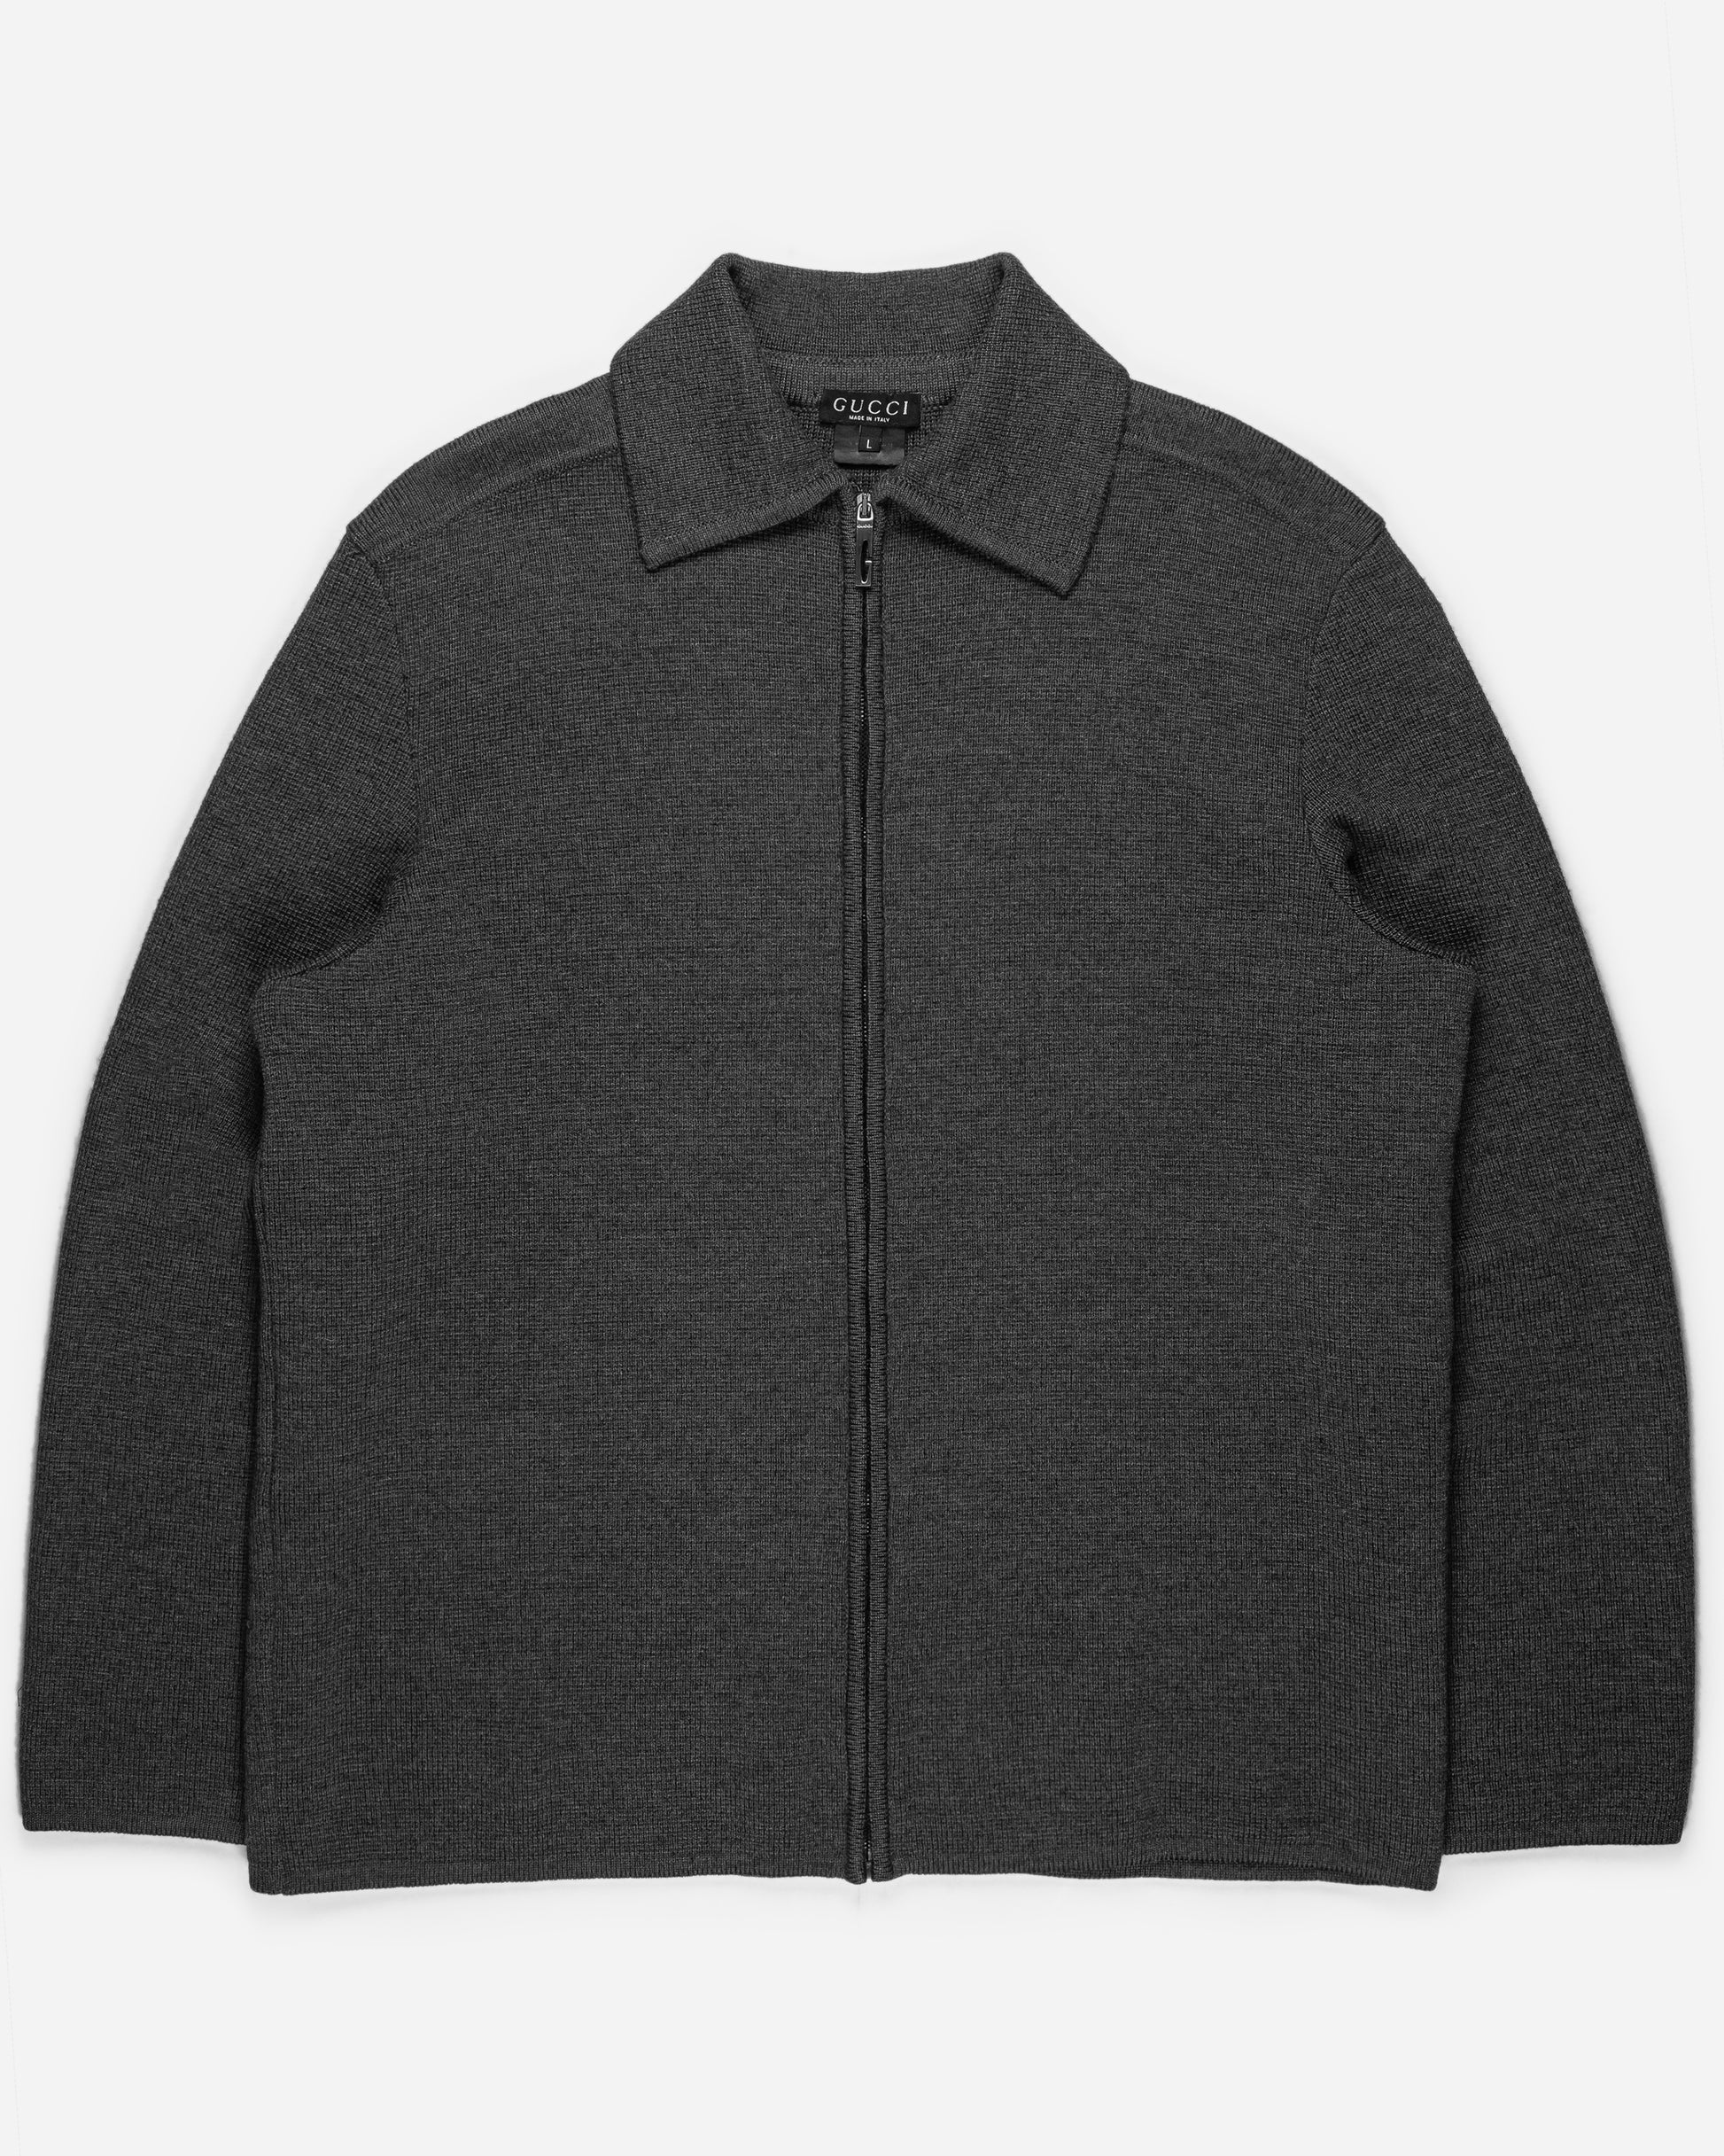 Gucci by Tom Ford Charcoal Grey Driver's Knit Zip-Up Sweater - SILVER LEAGUE